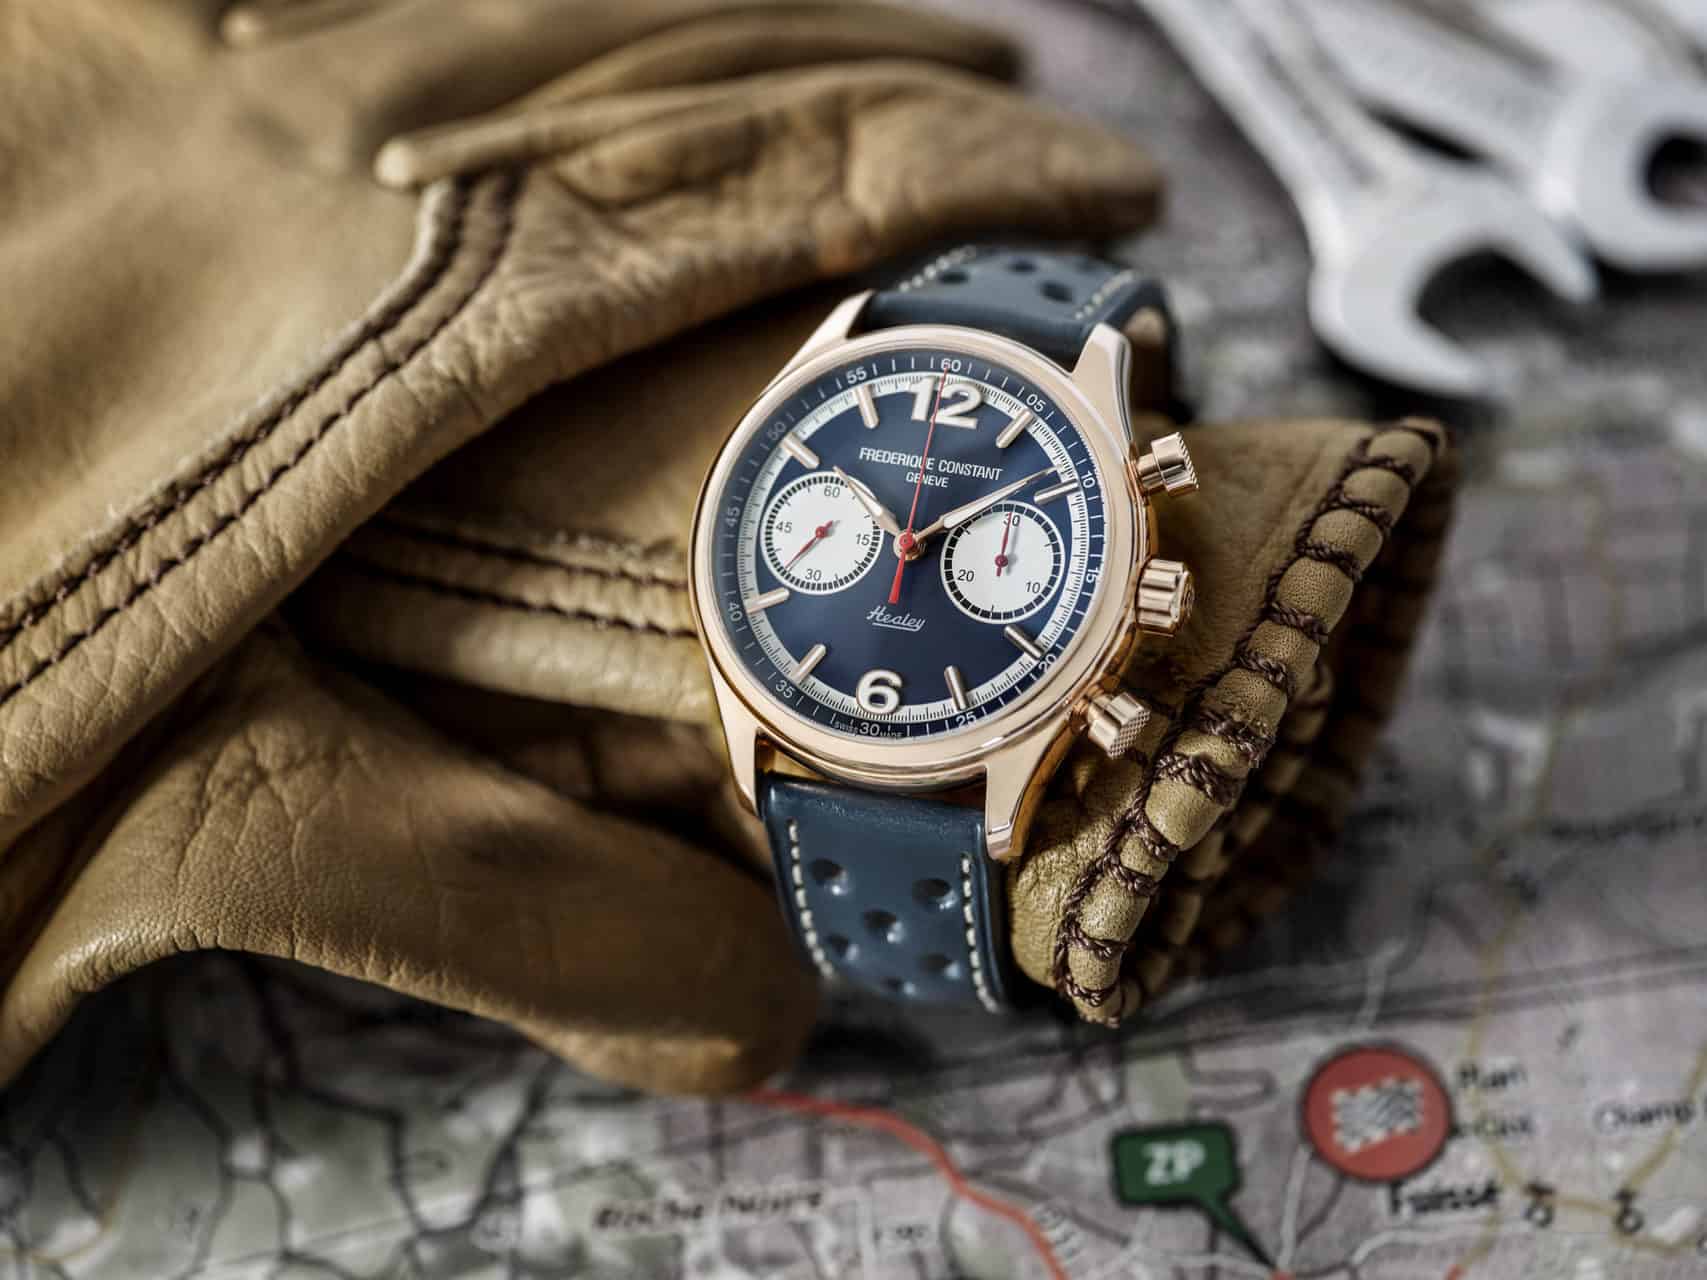 Frederique Constant Celebrates The Austin Healey Automobiles With Its New Limited Edtion Vintage Rally Chronograph